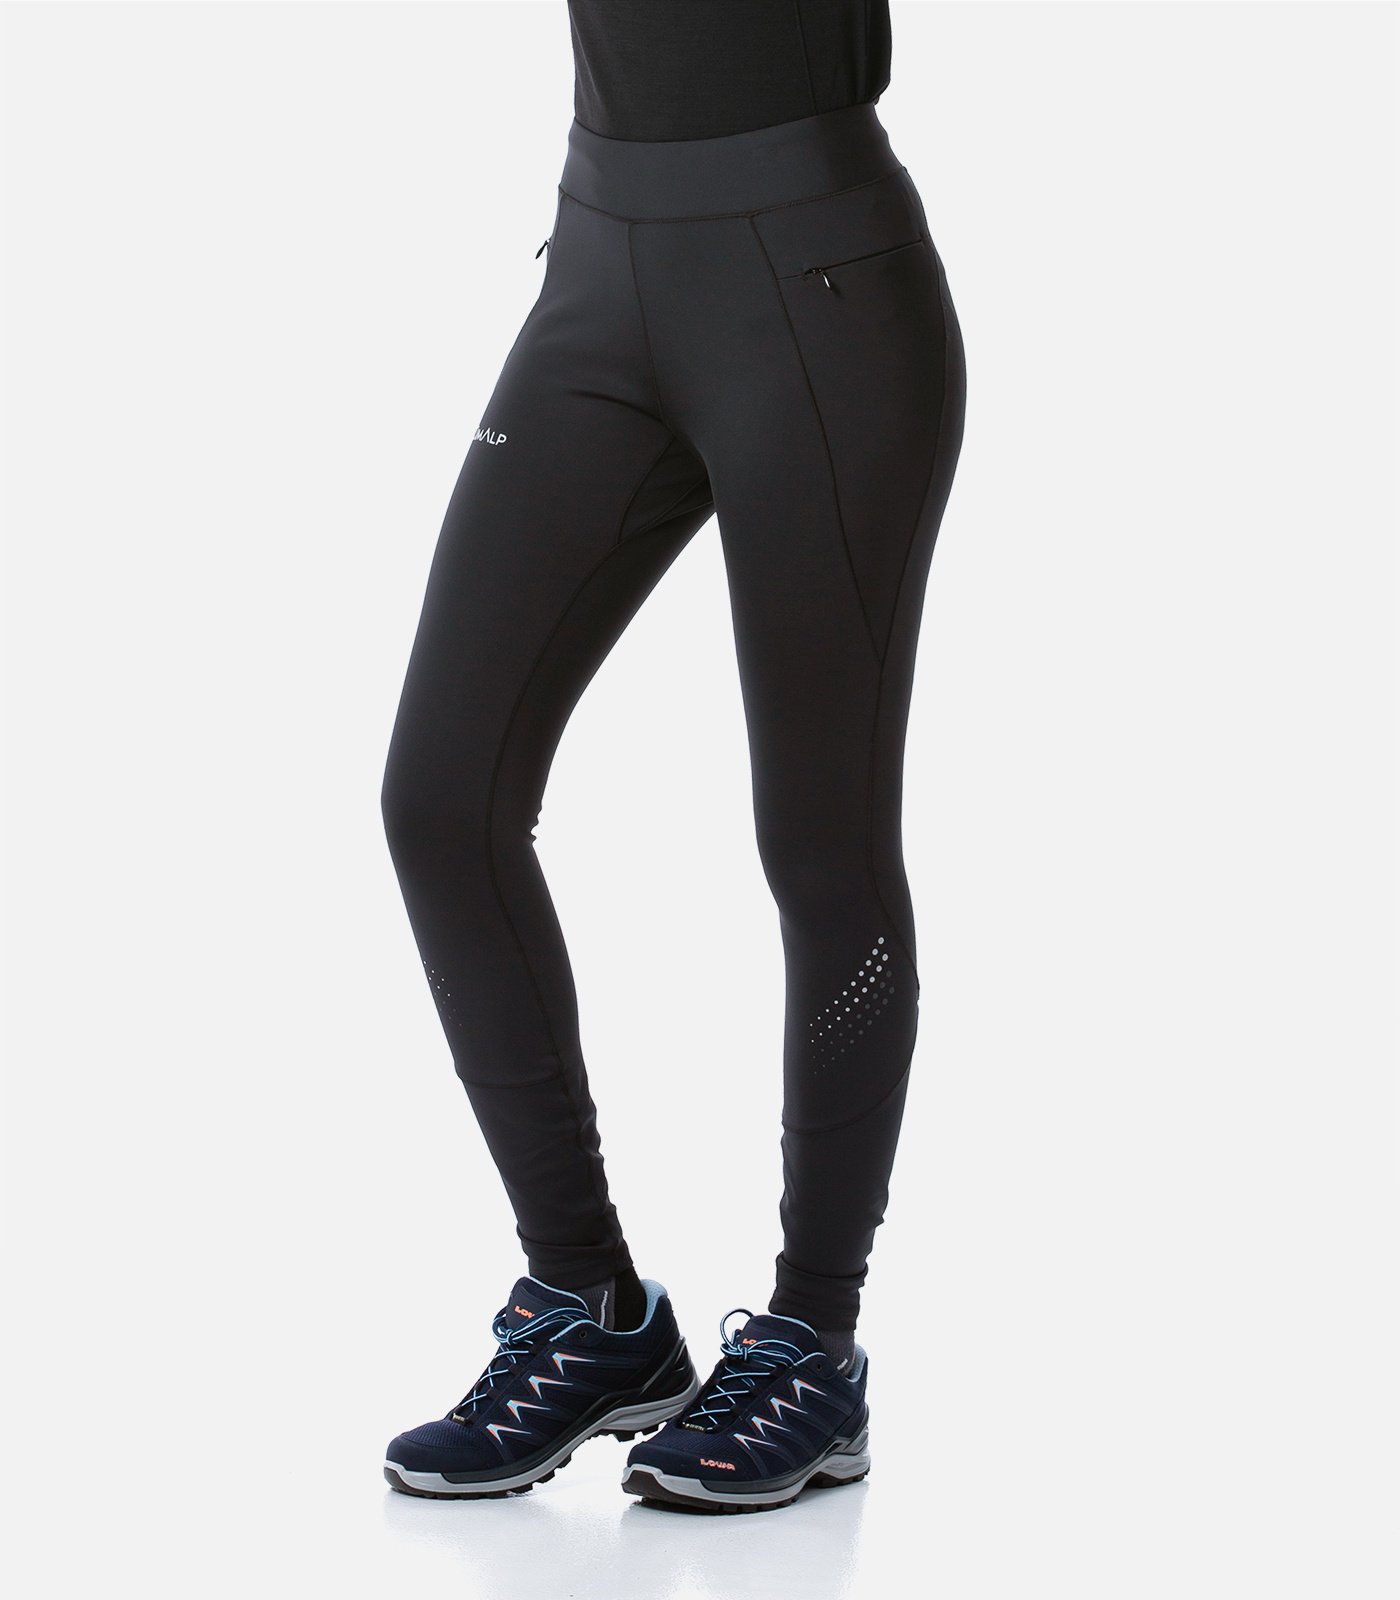 Womens WATER RESISTANT and WINDPROOF Winter Running Tights Black/Grey -  Clothing from Northern Runner UK